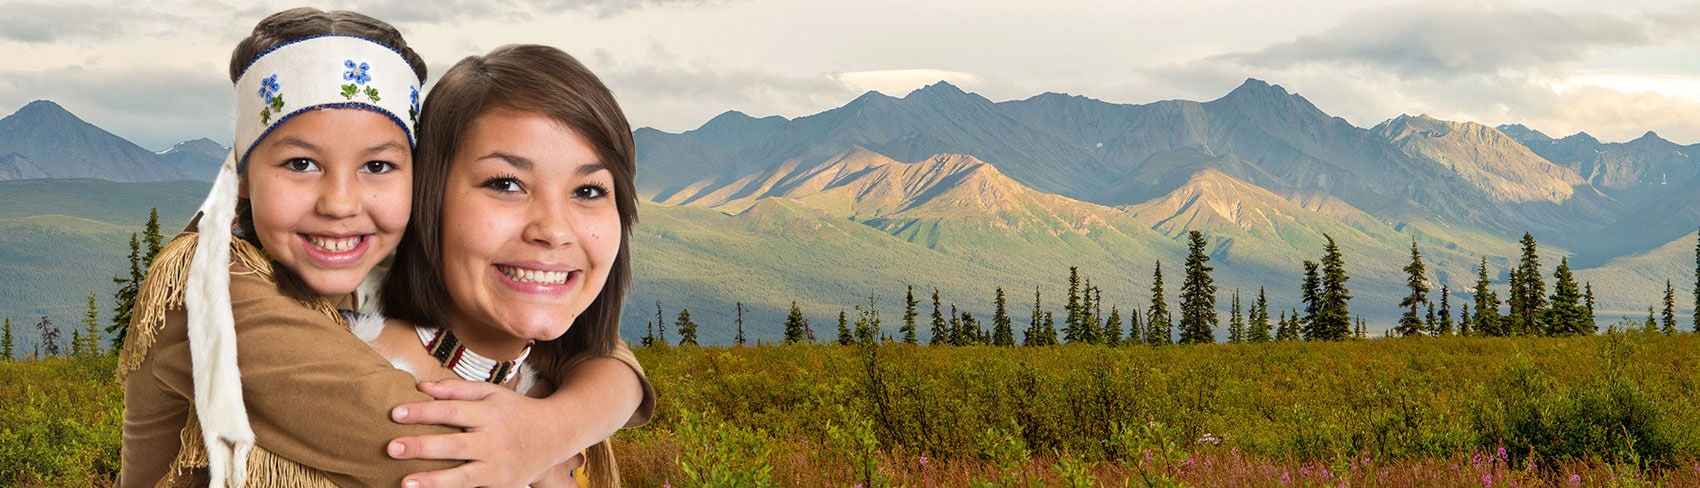 Woman with girl hugging her shoulders, both in traditional native dress, with Ahtna mountains in the background.